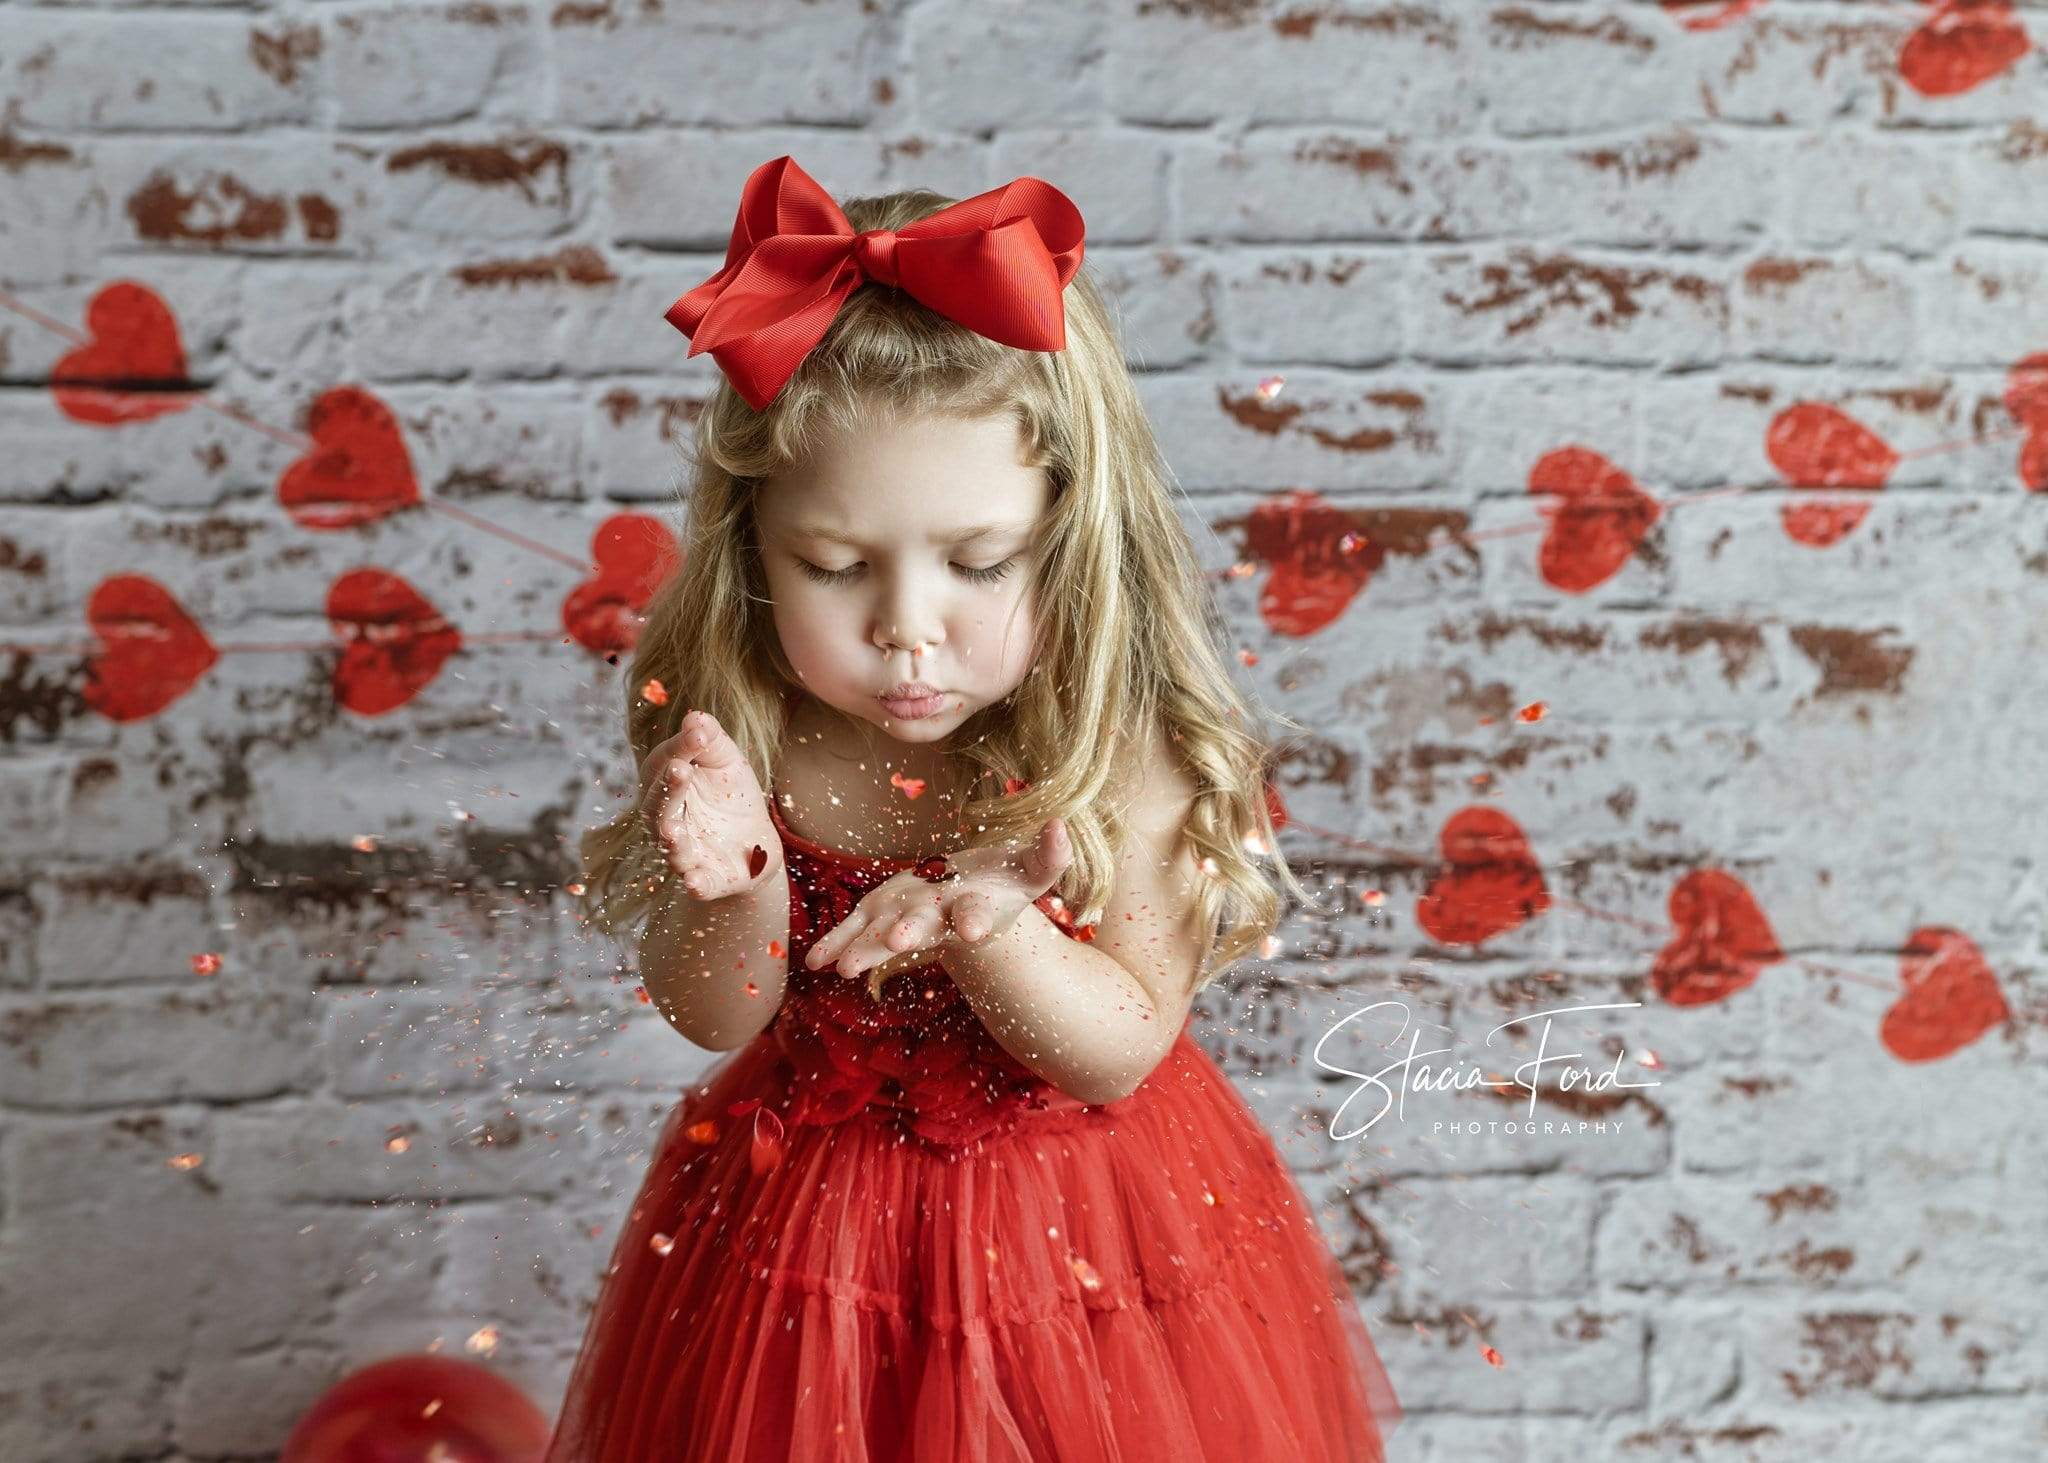 Prepare for Your 2021 Valentine’s Day Photography: 5 Amazing Valentine’s Day Photoshoot Ideas for Kids & Family!